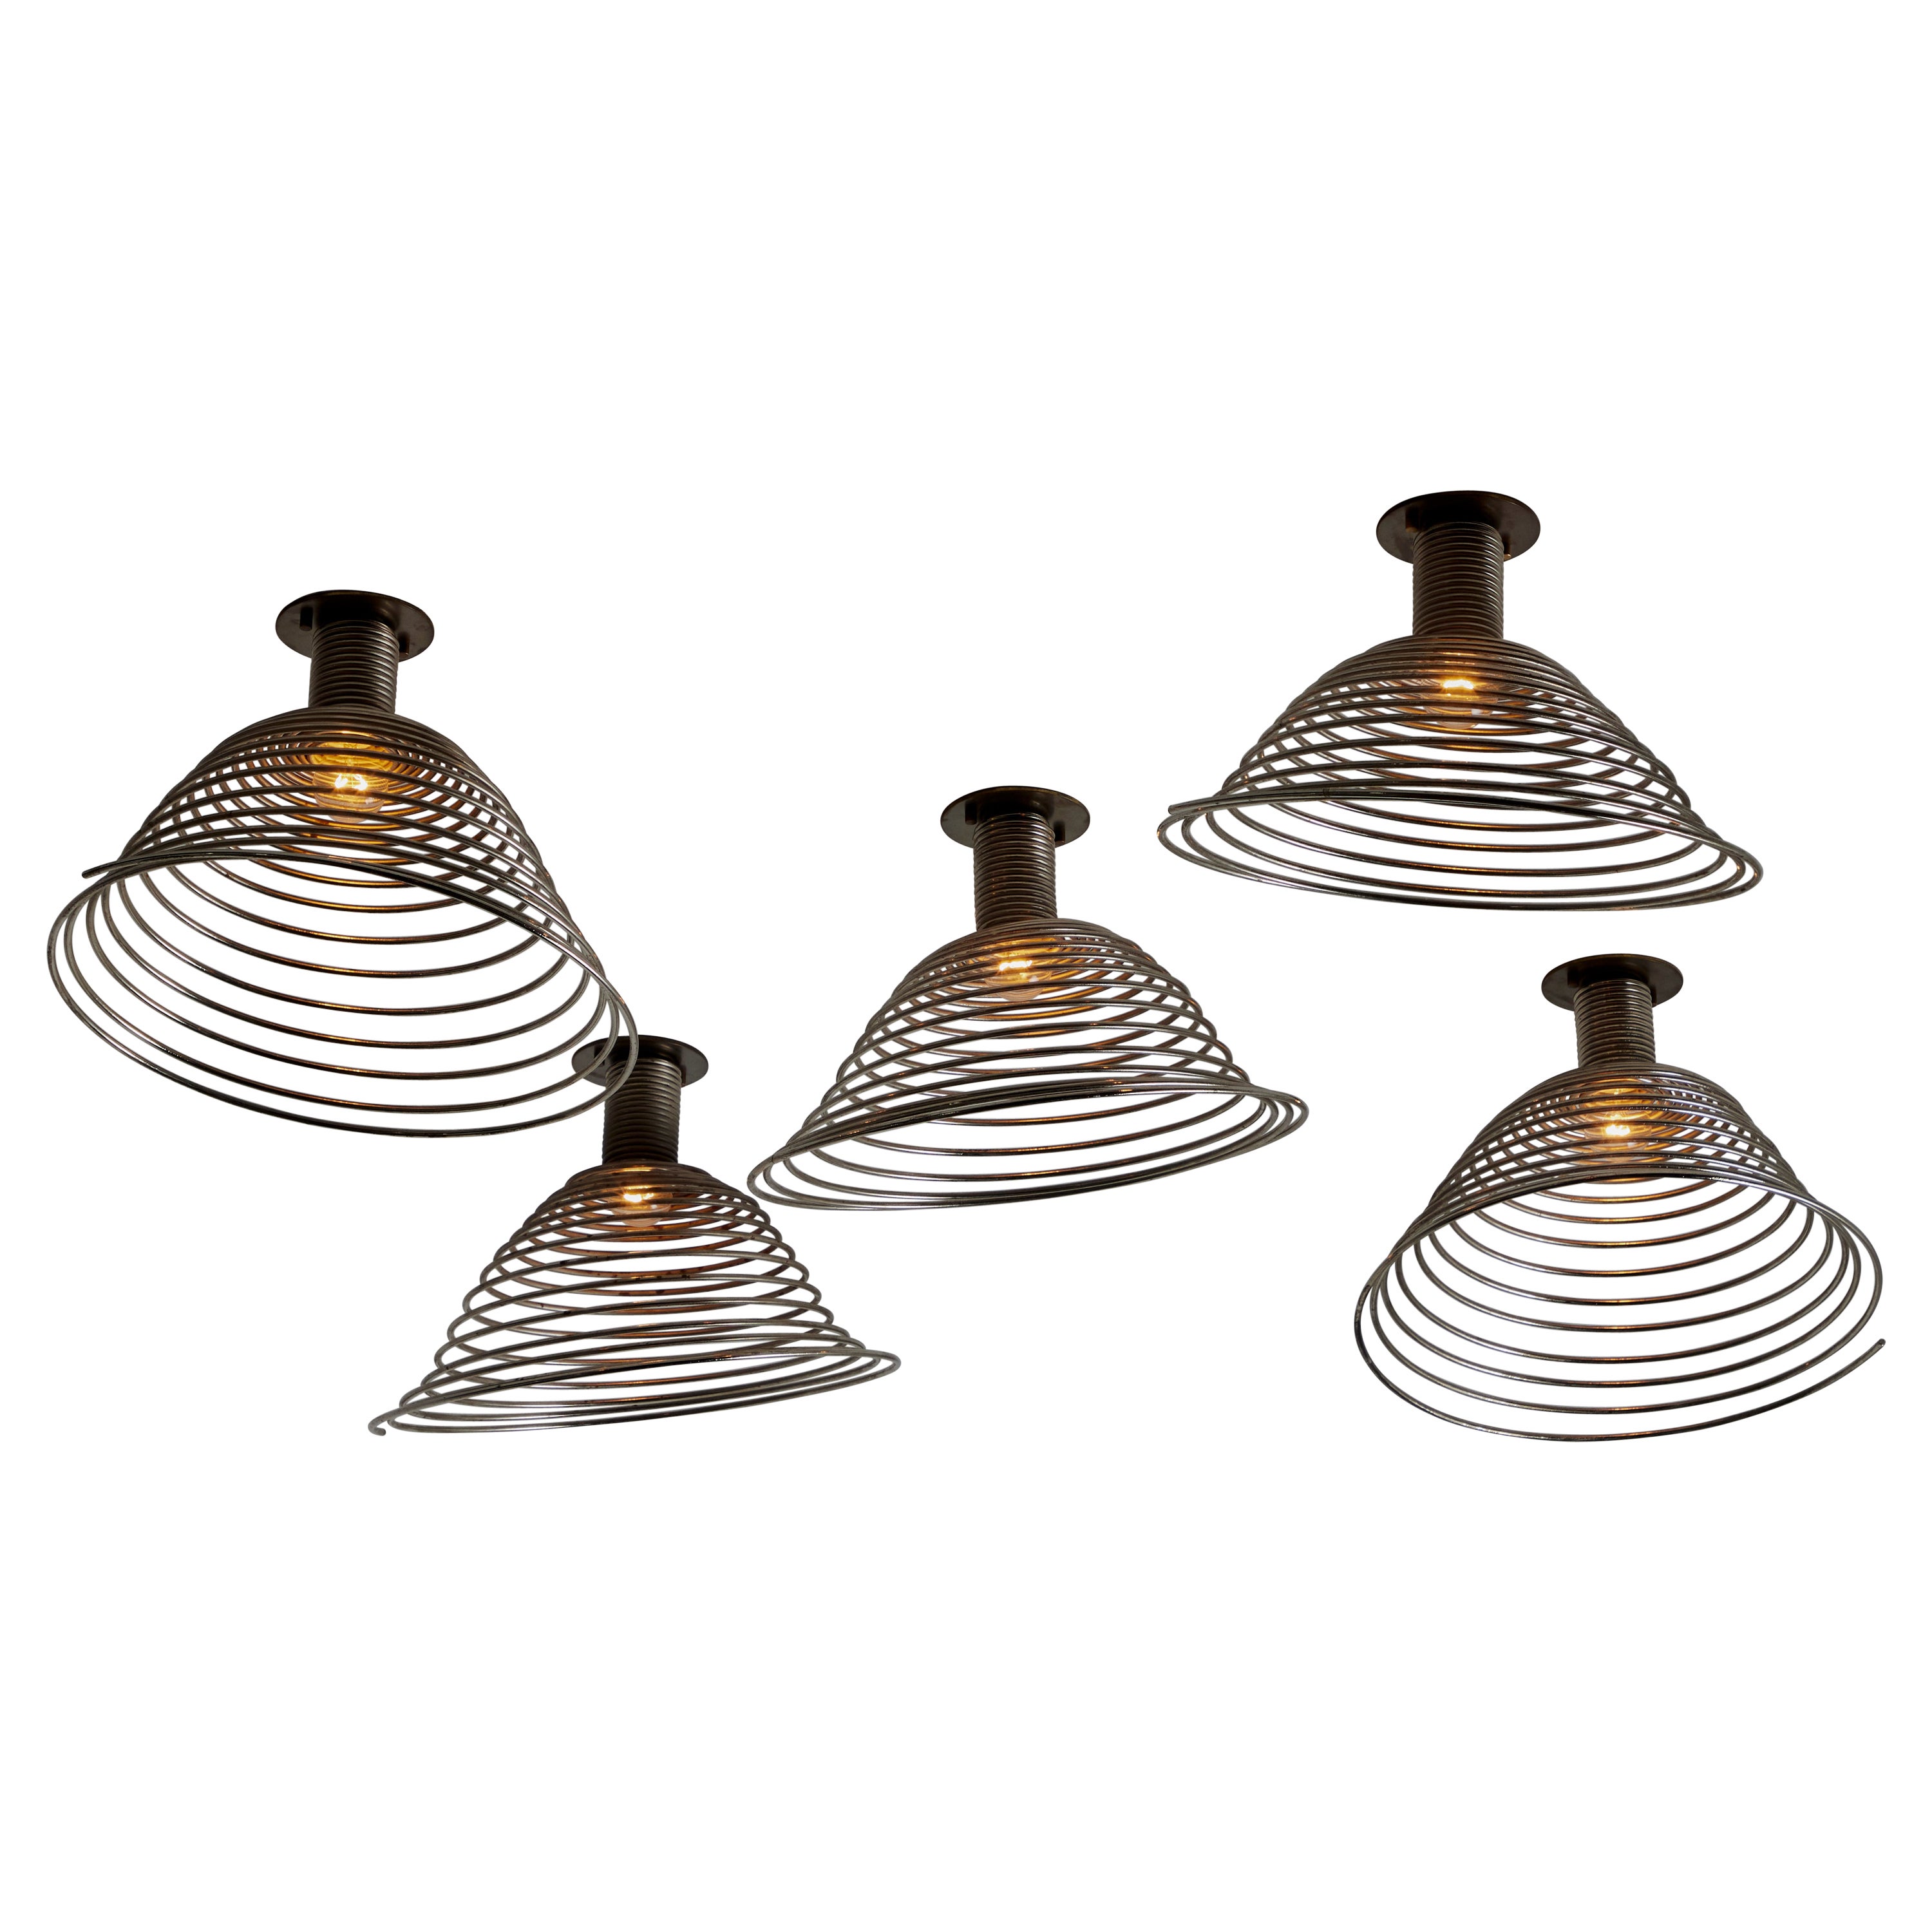 'Spirali' Ceiling or Wall Lights by Angelo Mangiarotti for Candle For Sale